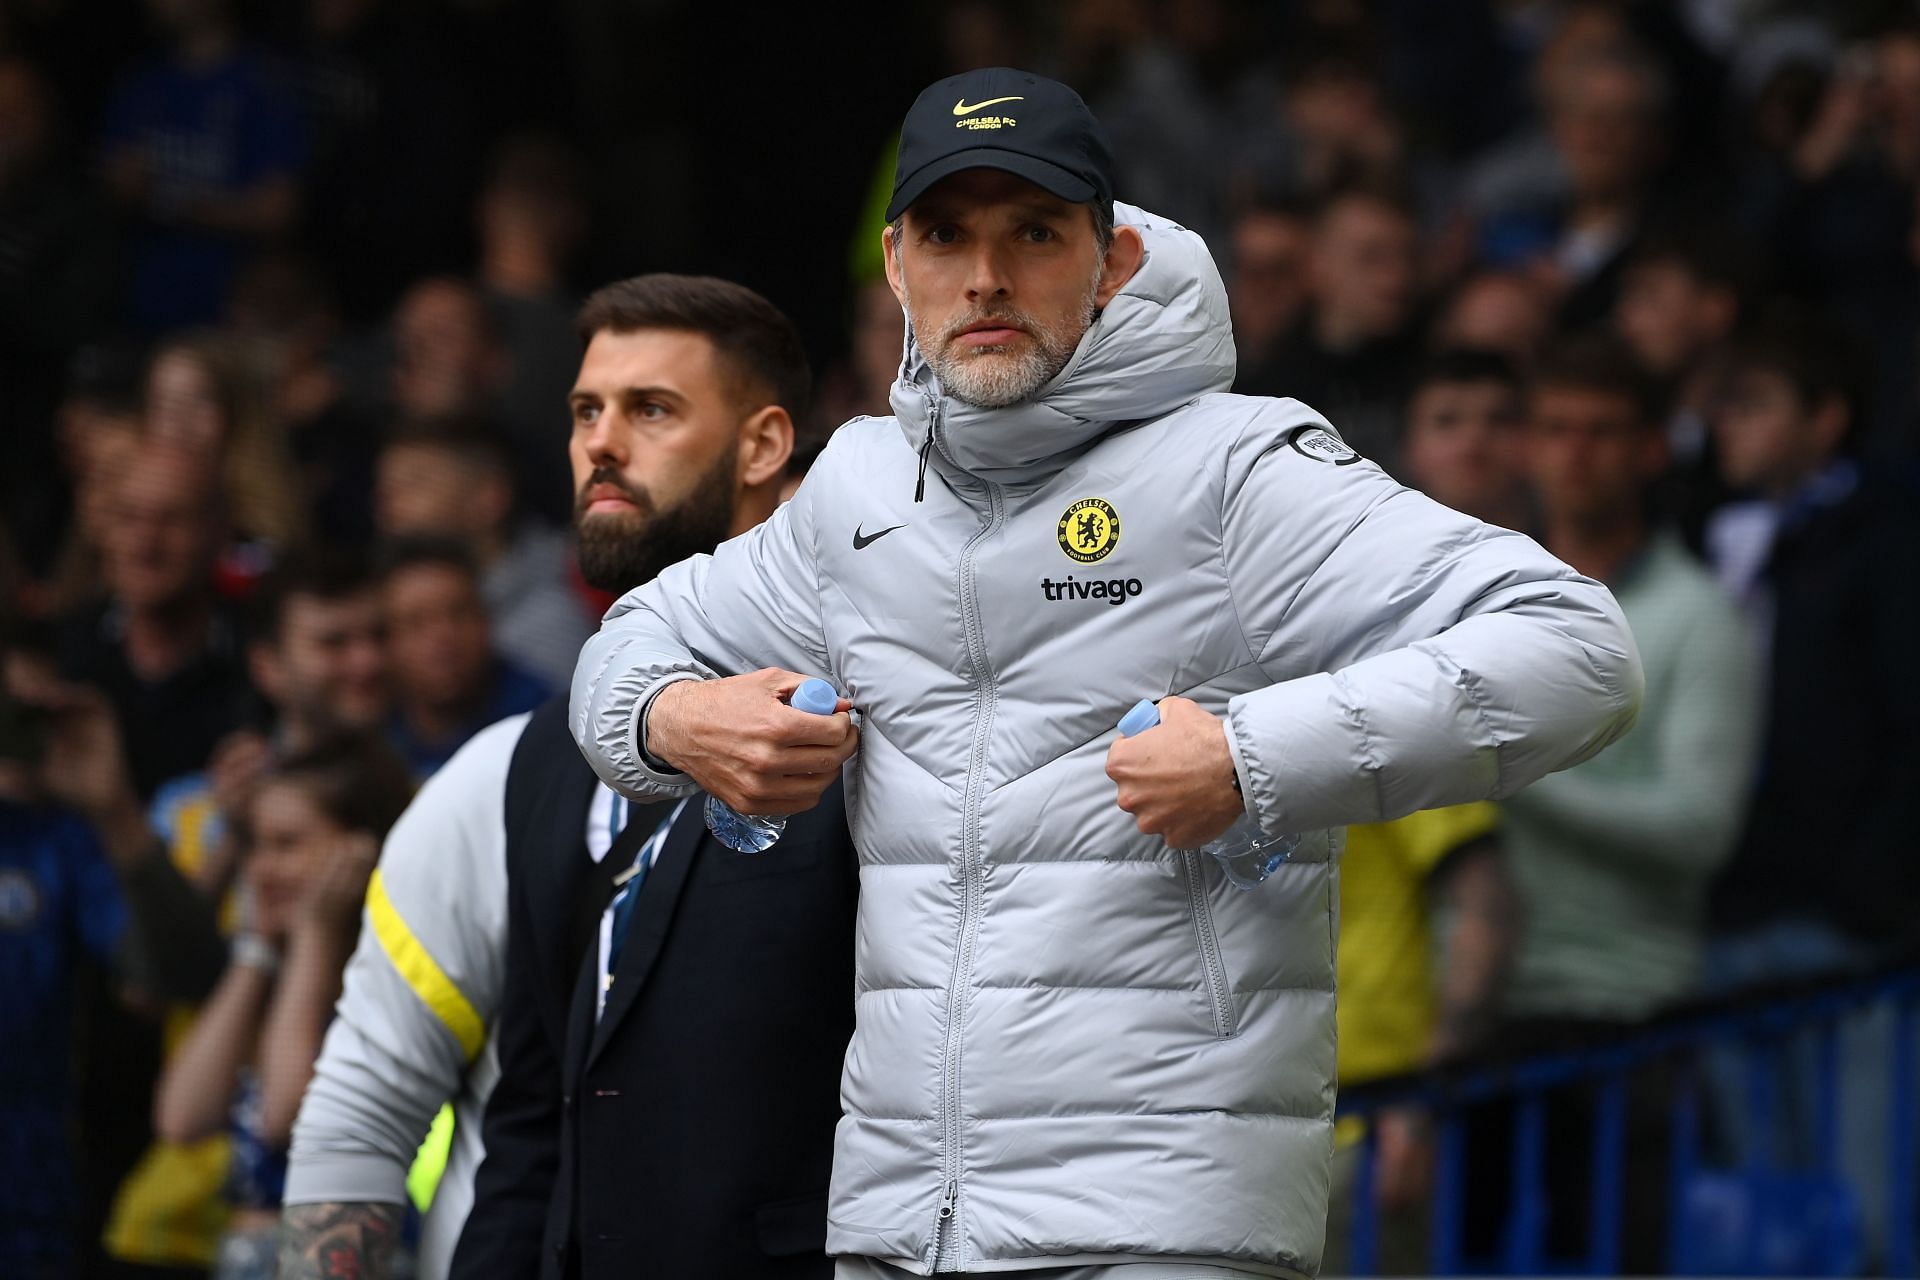 Chelsea manager Thomas Tuchel plans to strengthen his squad this summer